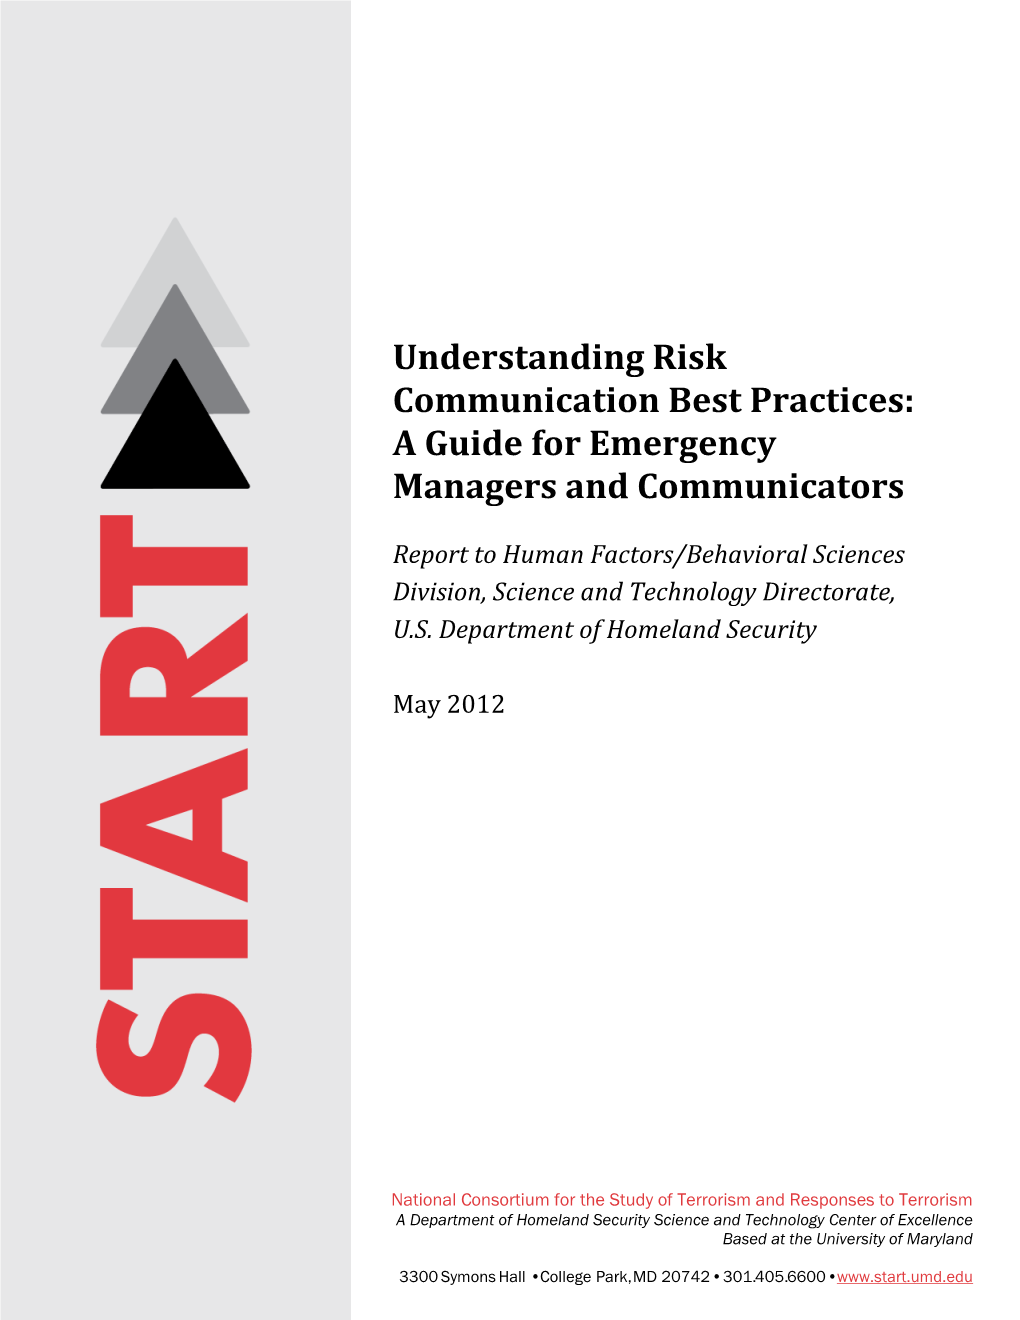 Understanding Risk Communication Best Practices: a Guide for Emergency Managers and Communicators